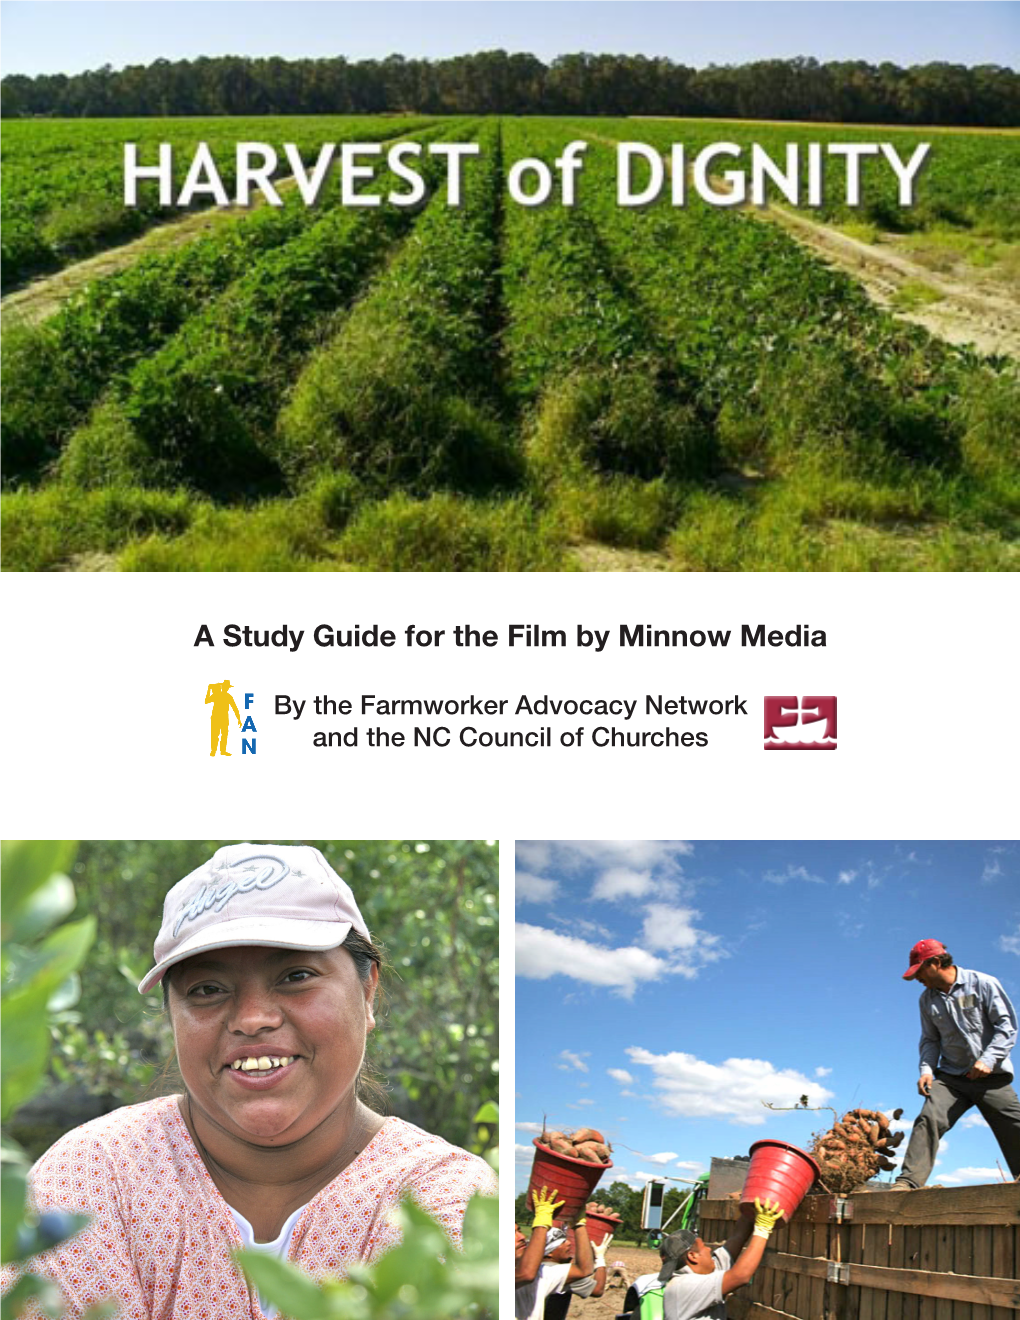 A Study Guide for the Film by Minnow Media